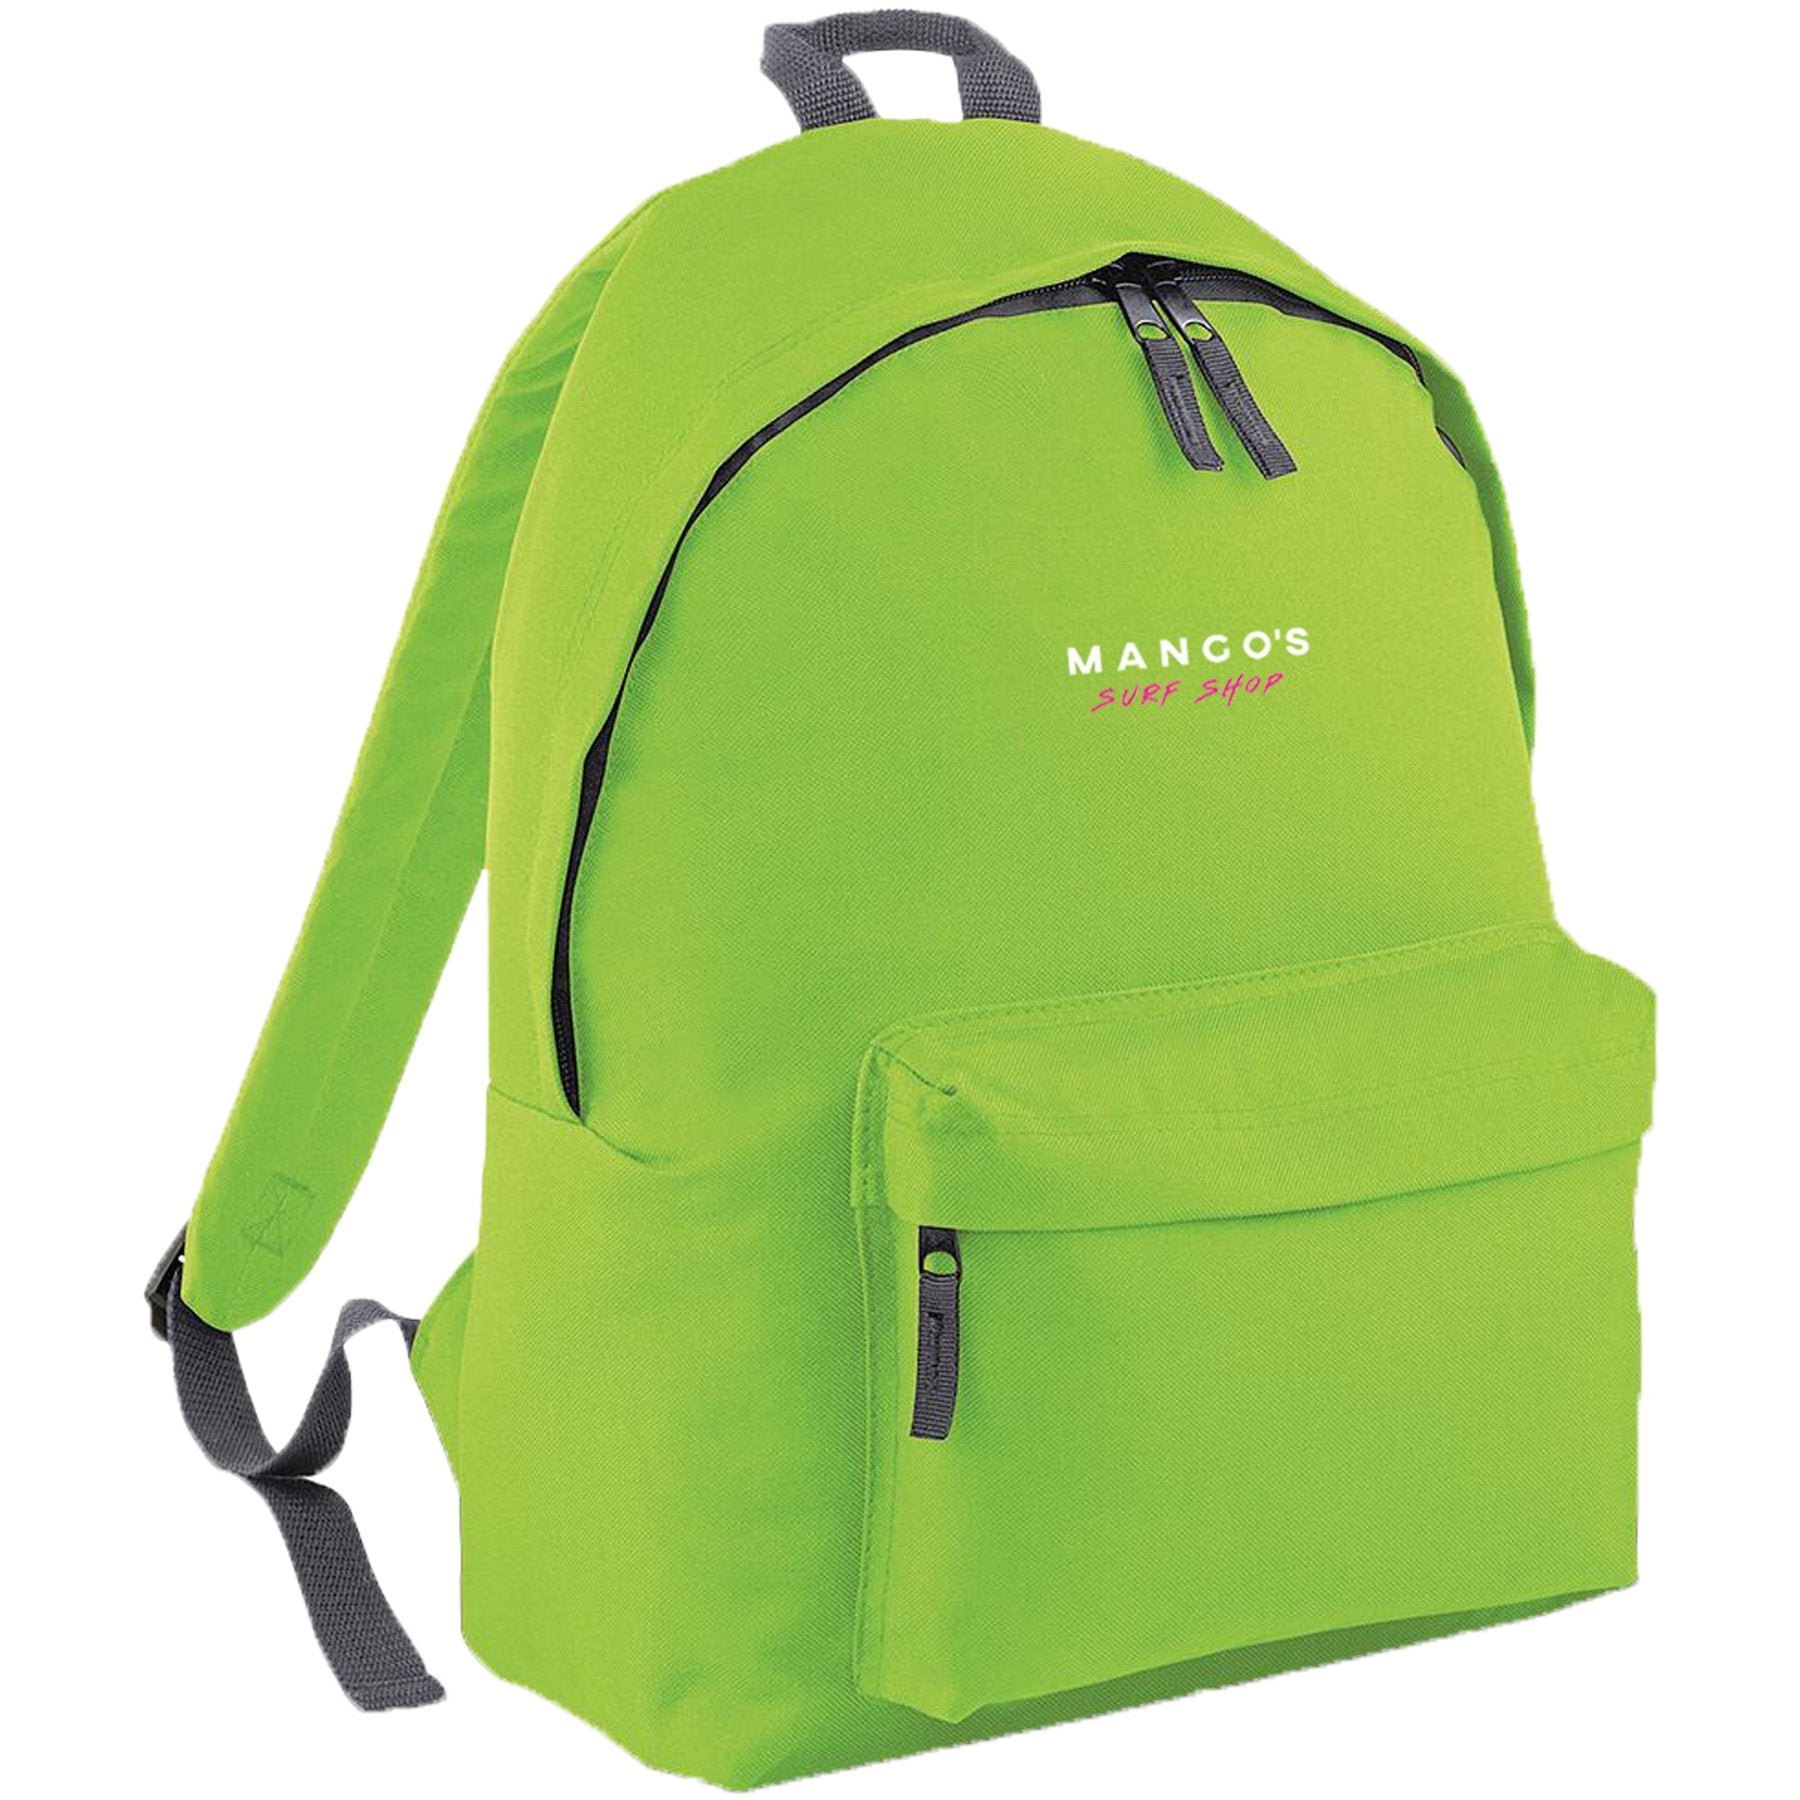 Surf Shop, Surf Clothing, Mango Surfing, New Mango Backpack, Bags, Lime Green